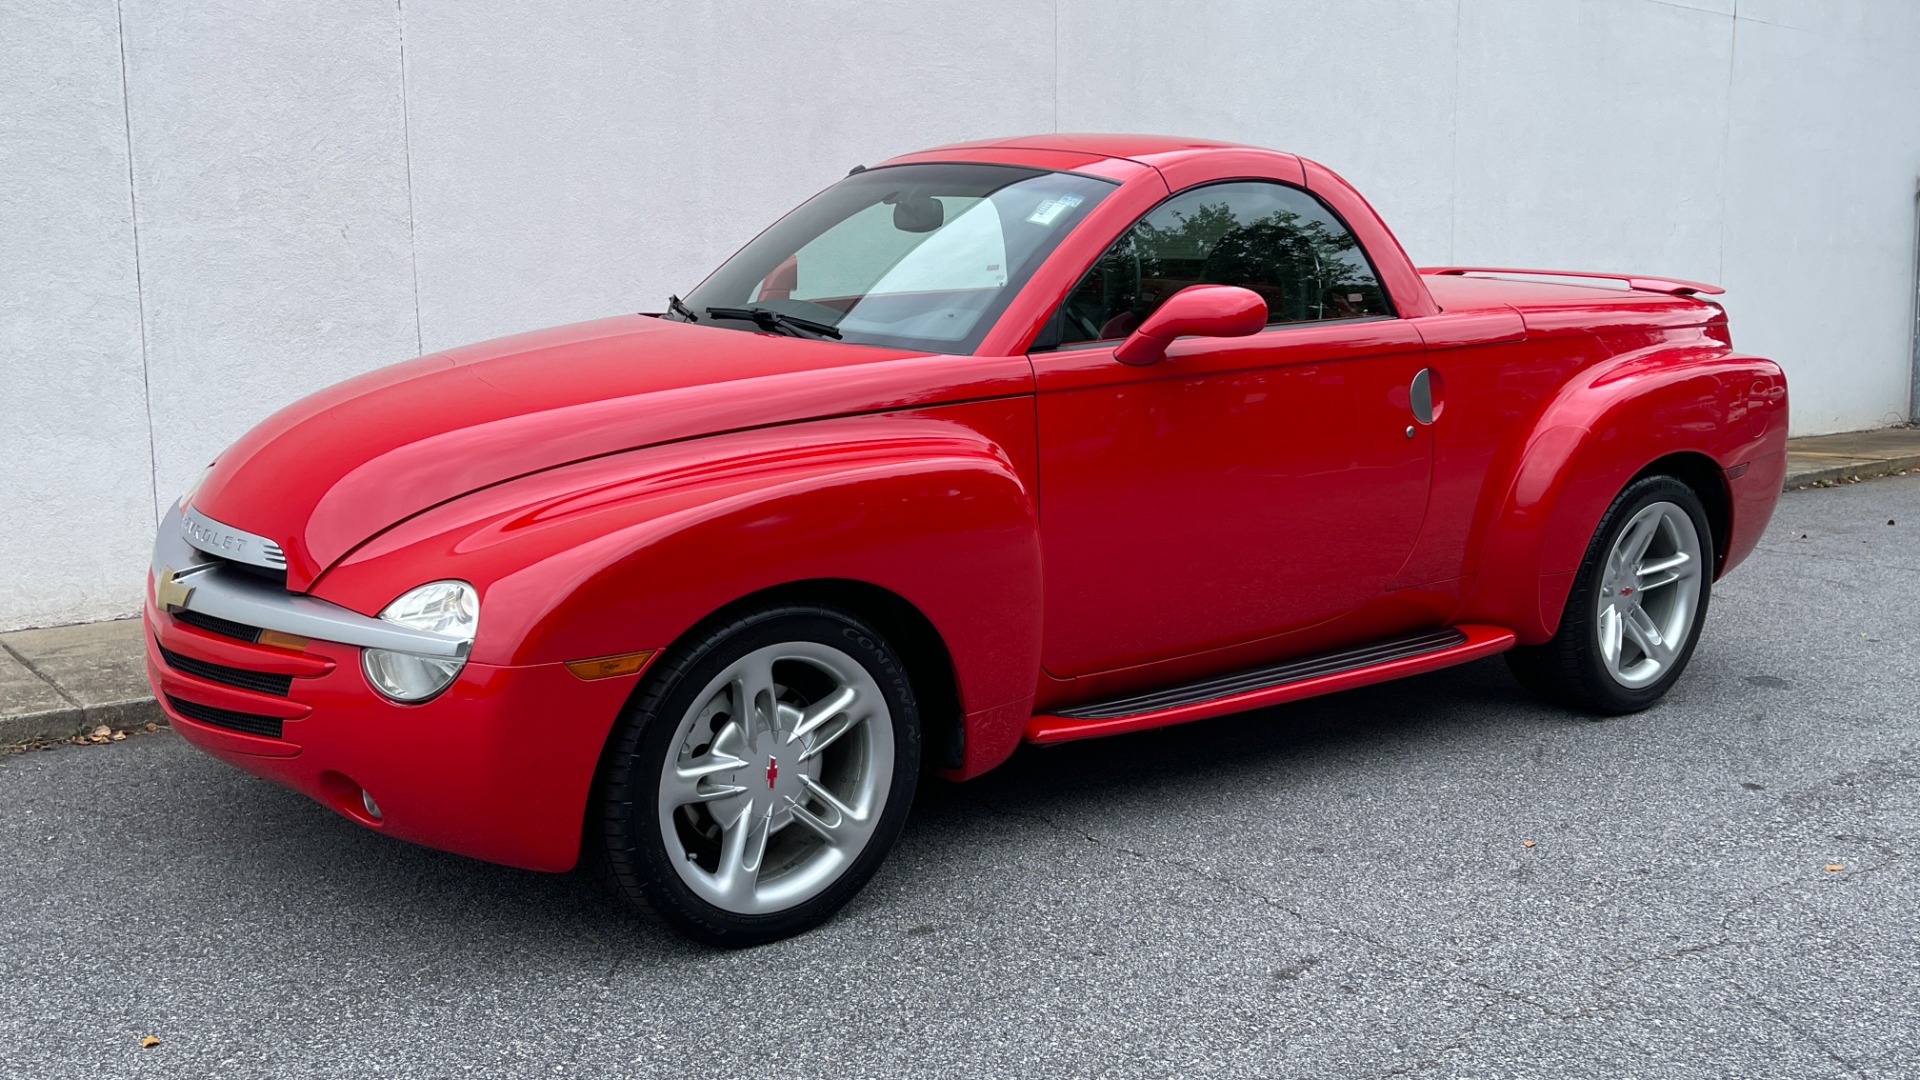 Used 2004 Chevrolet SSR LS / CONVERTIBLE / 5.3L V8 / LEATHER / HEATED SEATS / BACKUP CAMERA for sale Sold at Formula Imports in Charlotte NC 28227 44